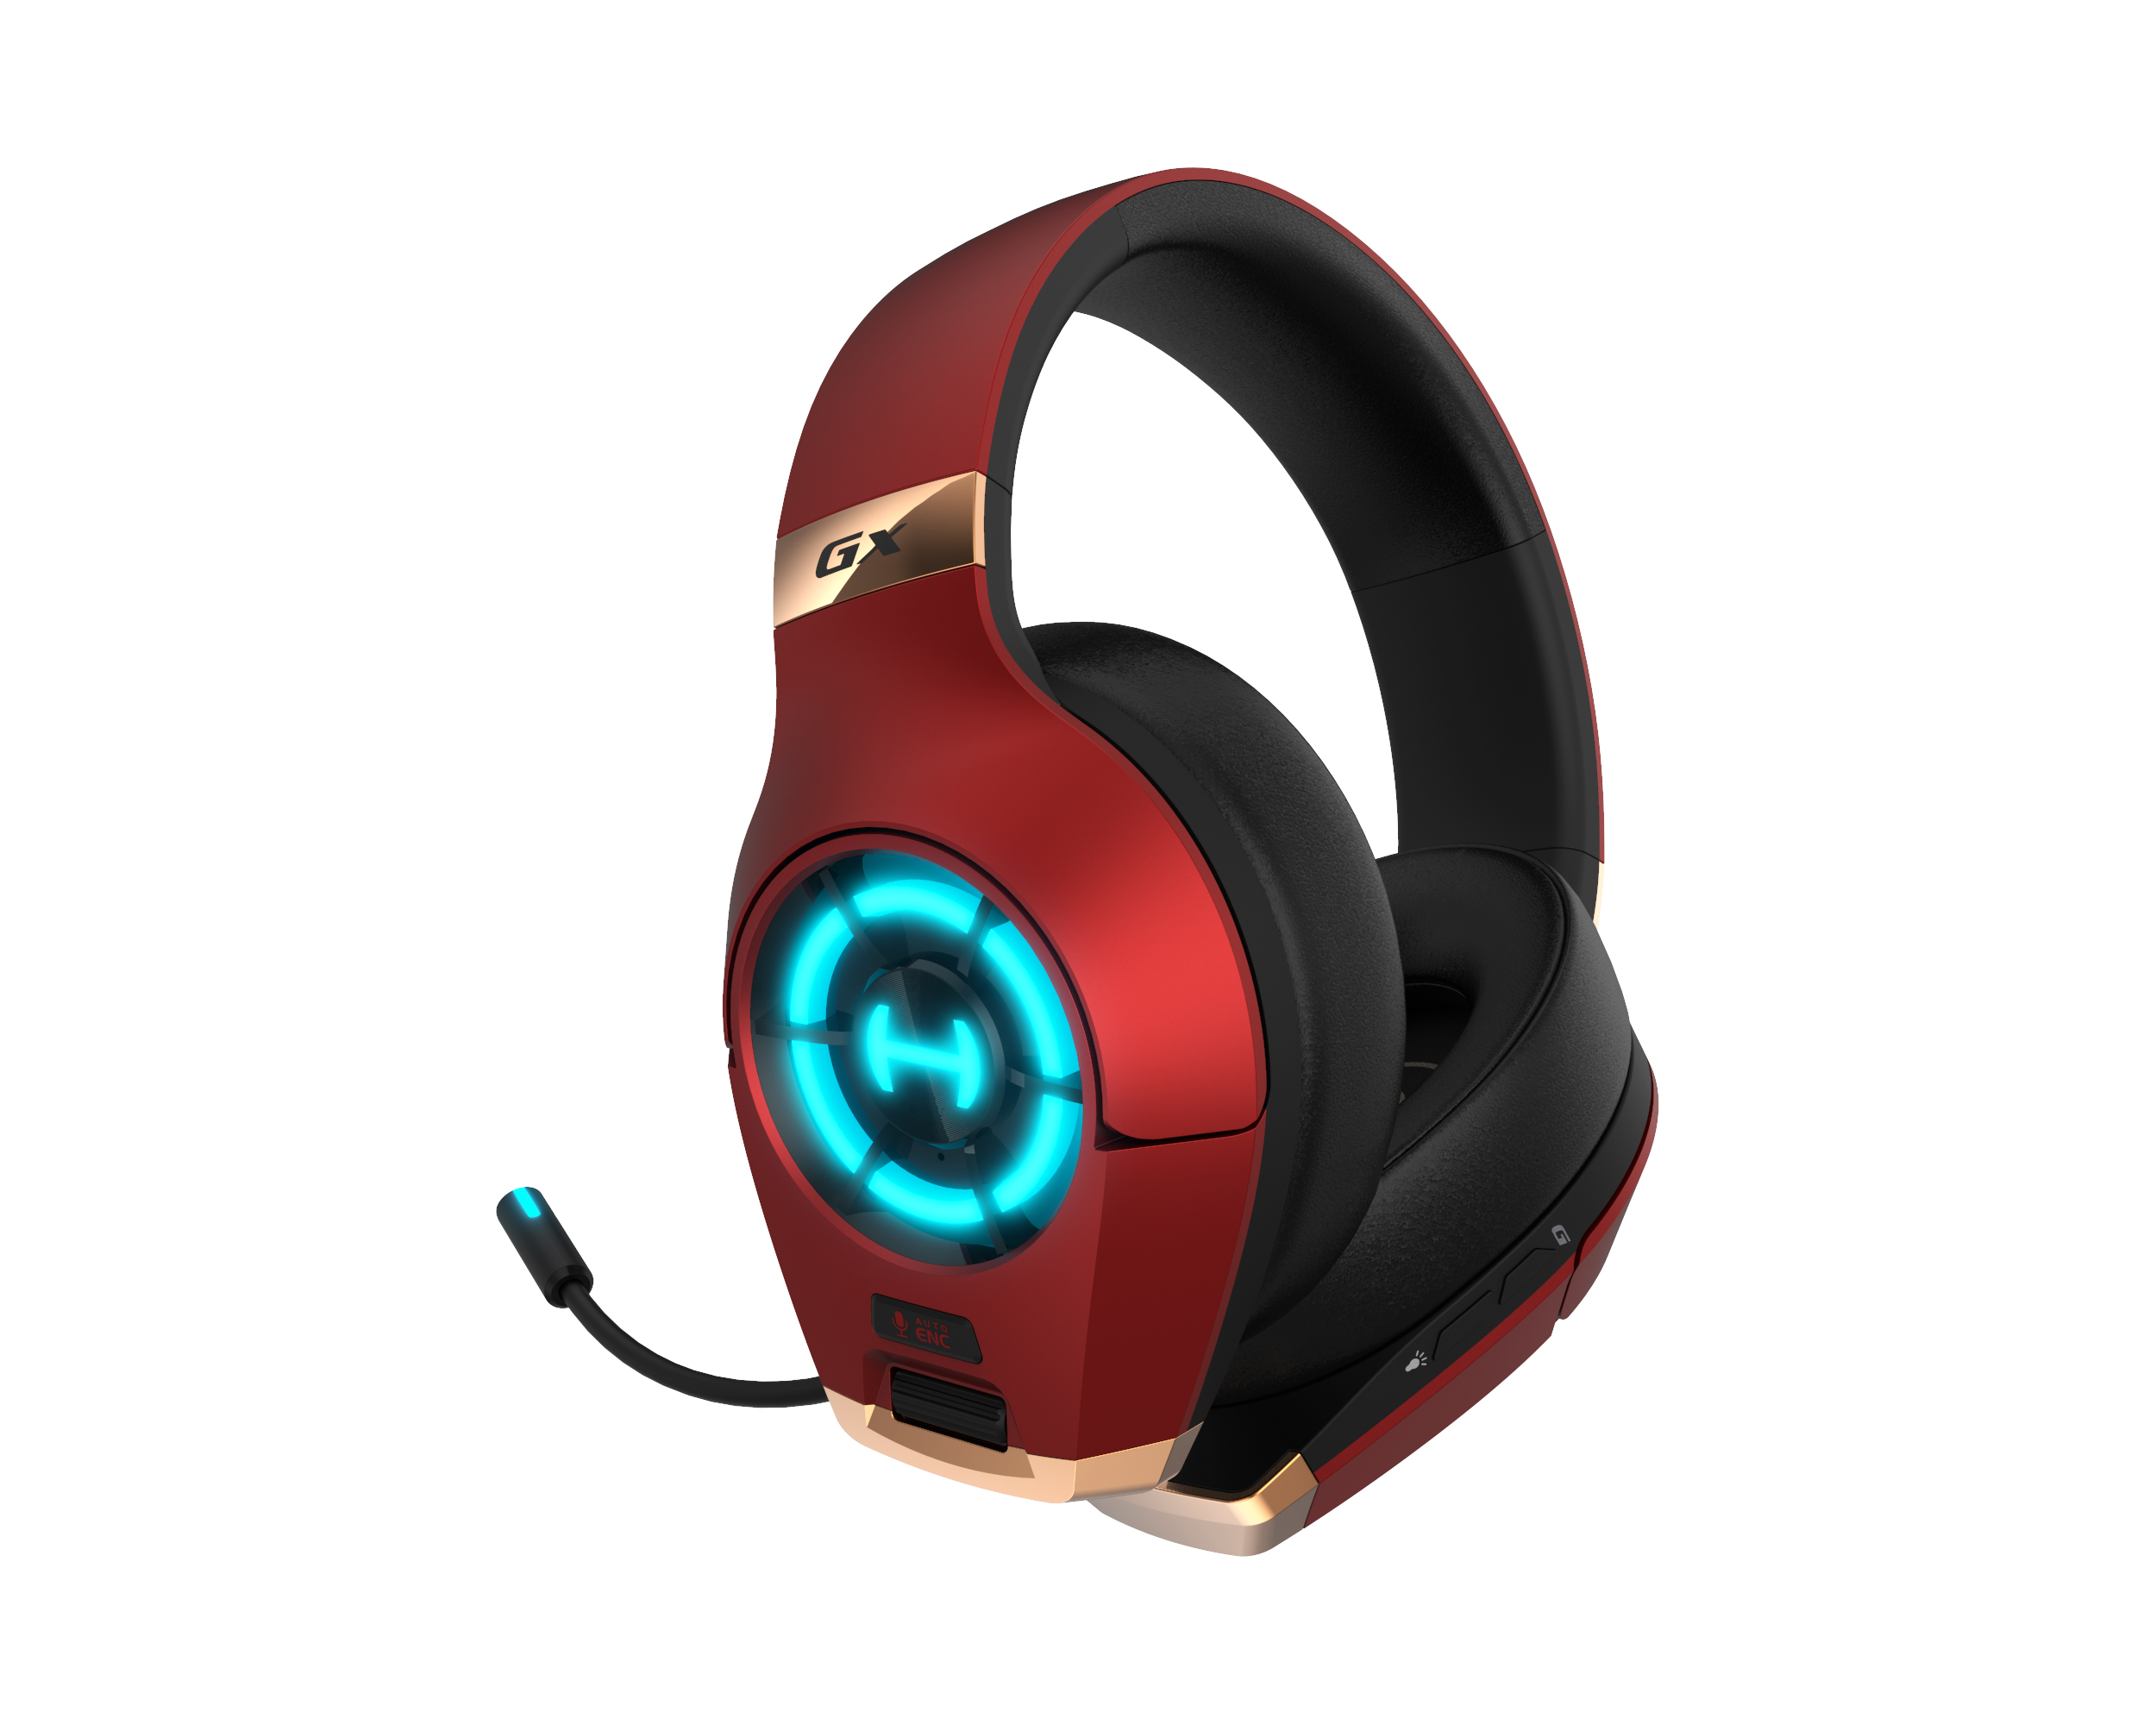 Edifier  GX Hi-Res Gaming Headset with Hi-Res, Dual Noise Cancelling Microphone, Multi-Mode, 3.5mm AUX, USB 3.0, USB-C Connection – Red